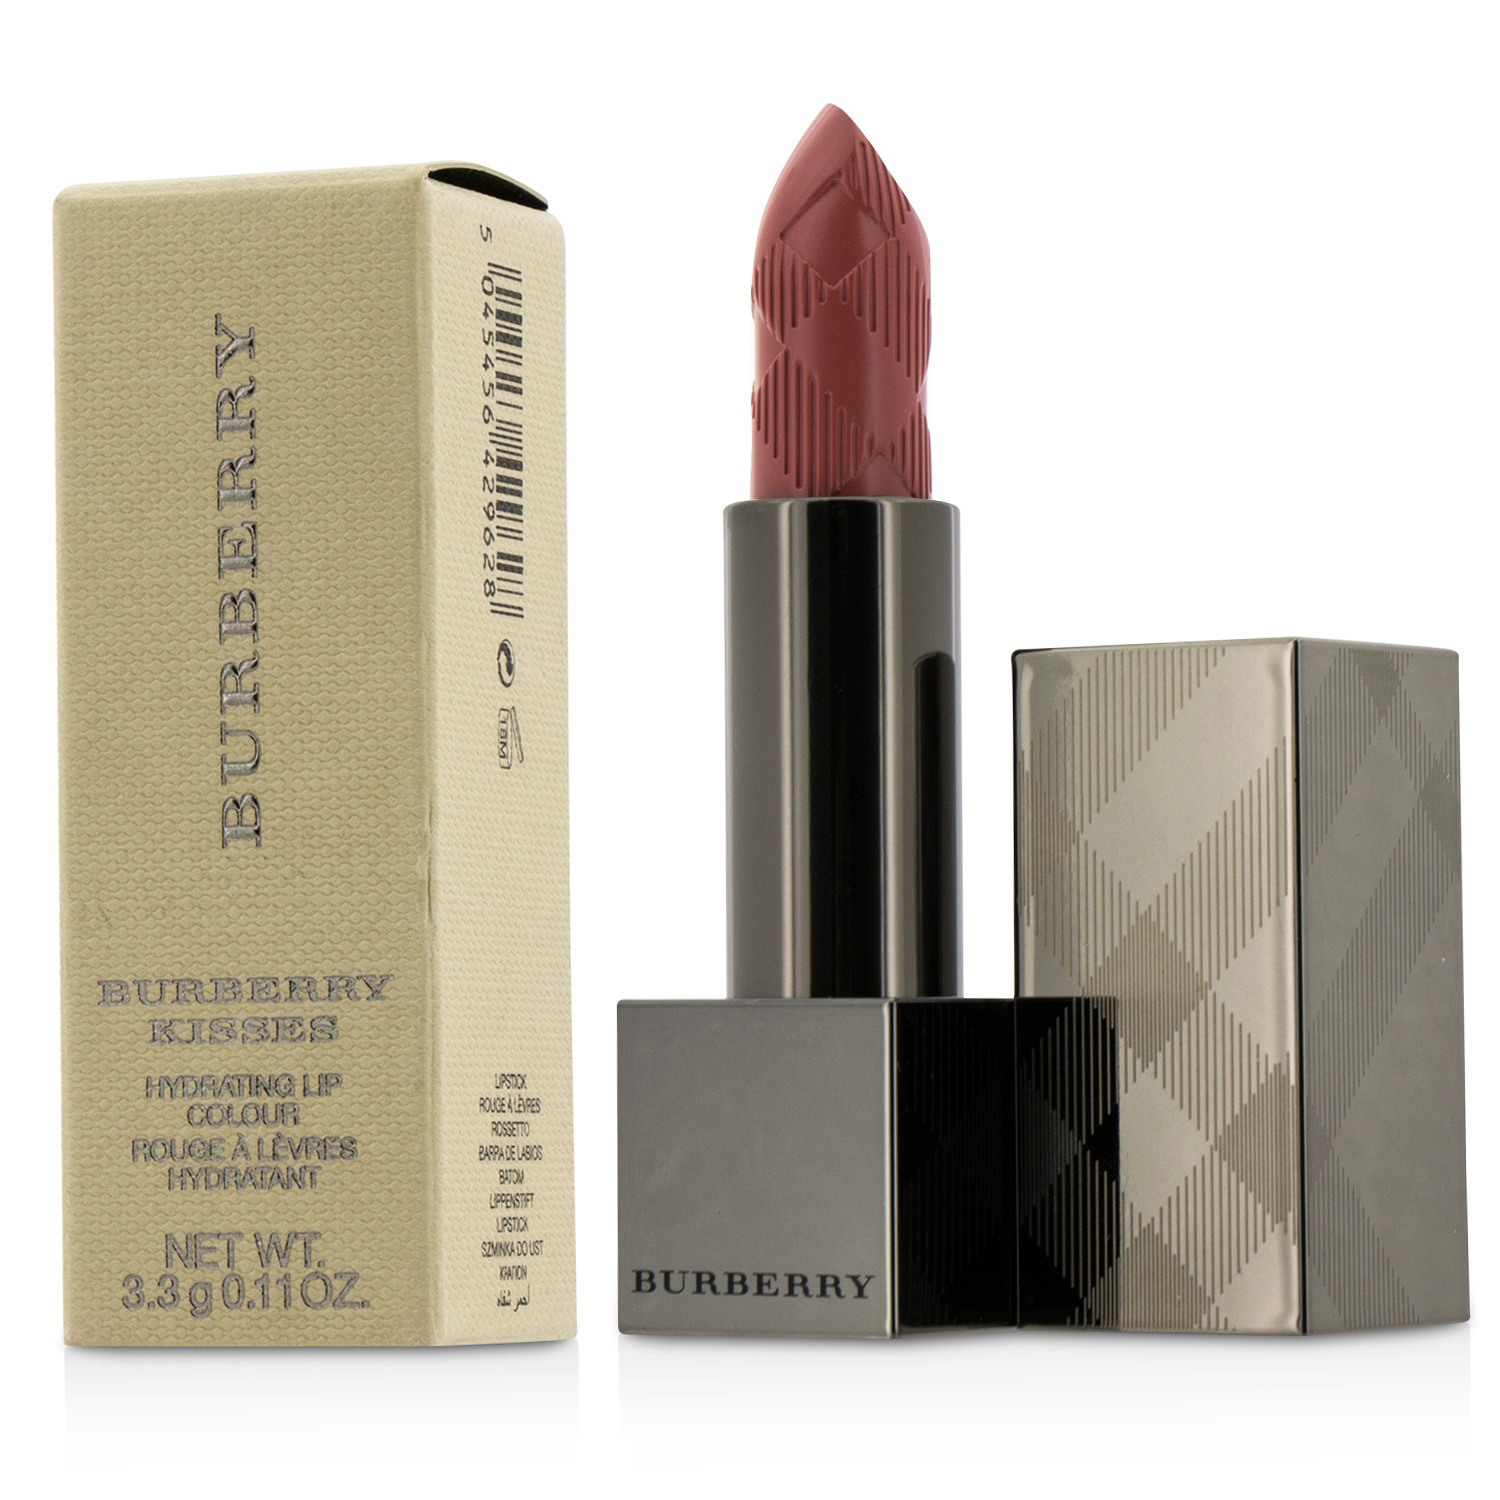 Burberry Kisses Hydrating Lip Colour - # No. 09 Tulip Pink Burberry Image